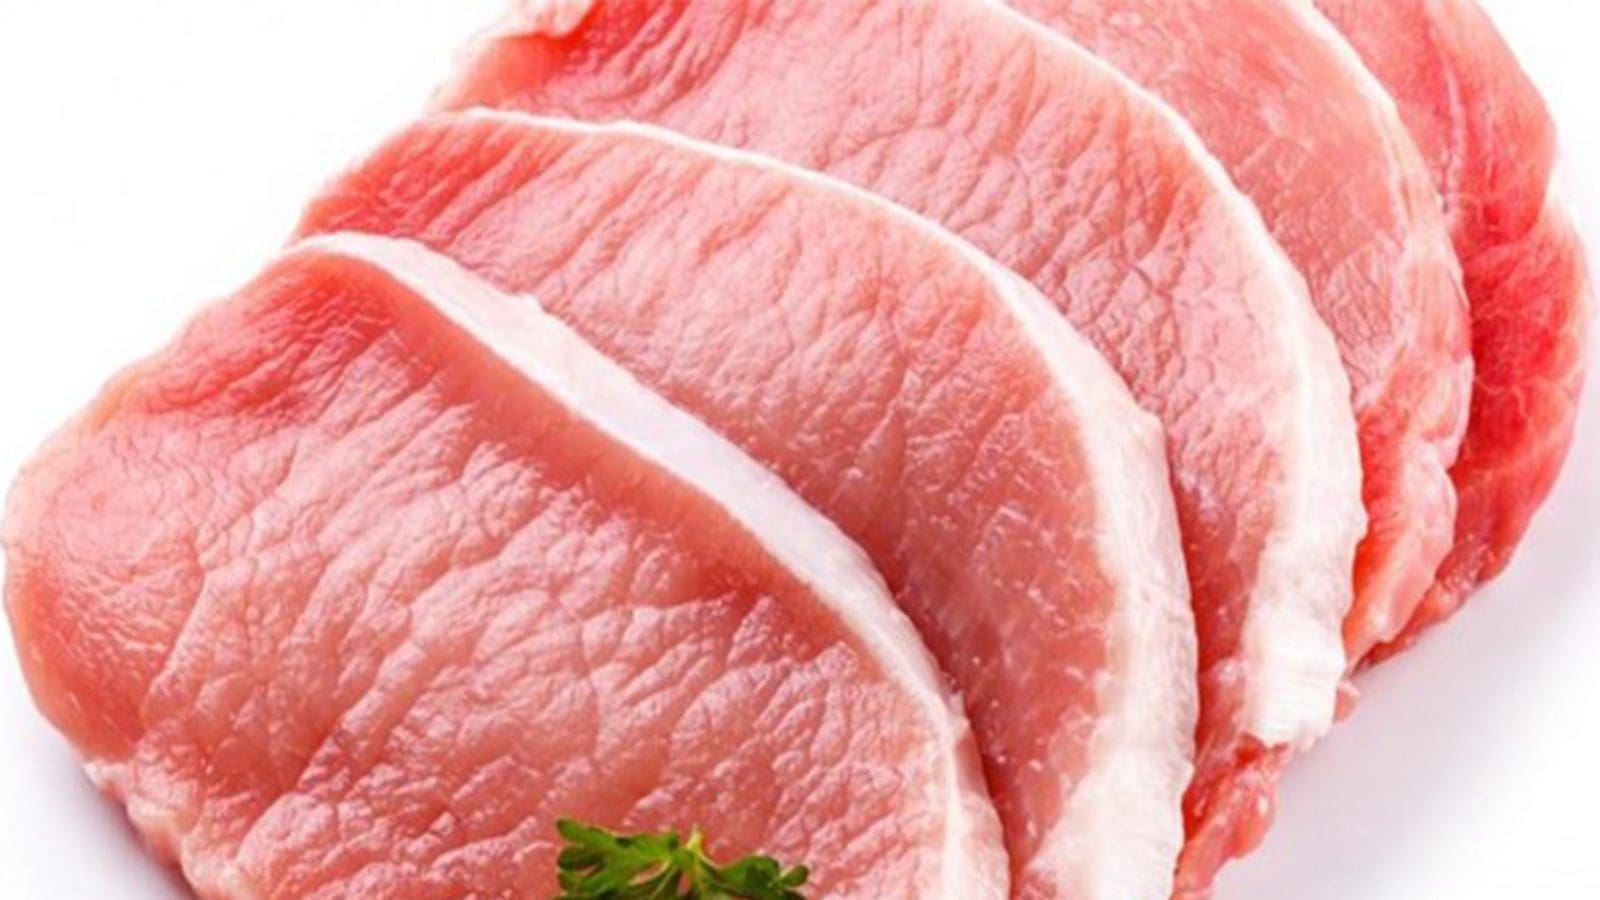 USDA releases updated guideline for Salmonella control in swine slaughter, pork processing